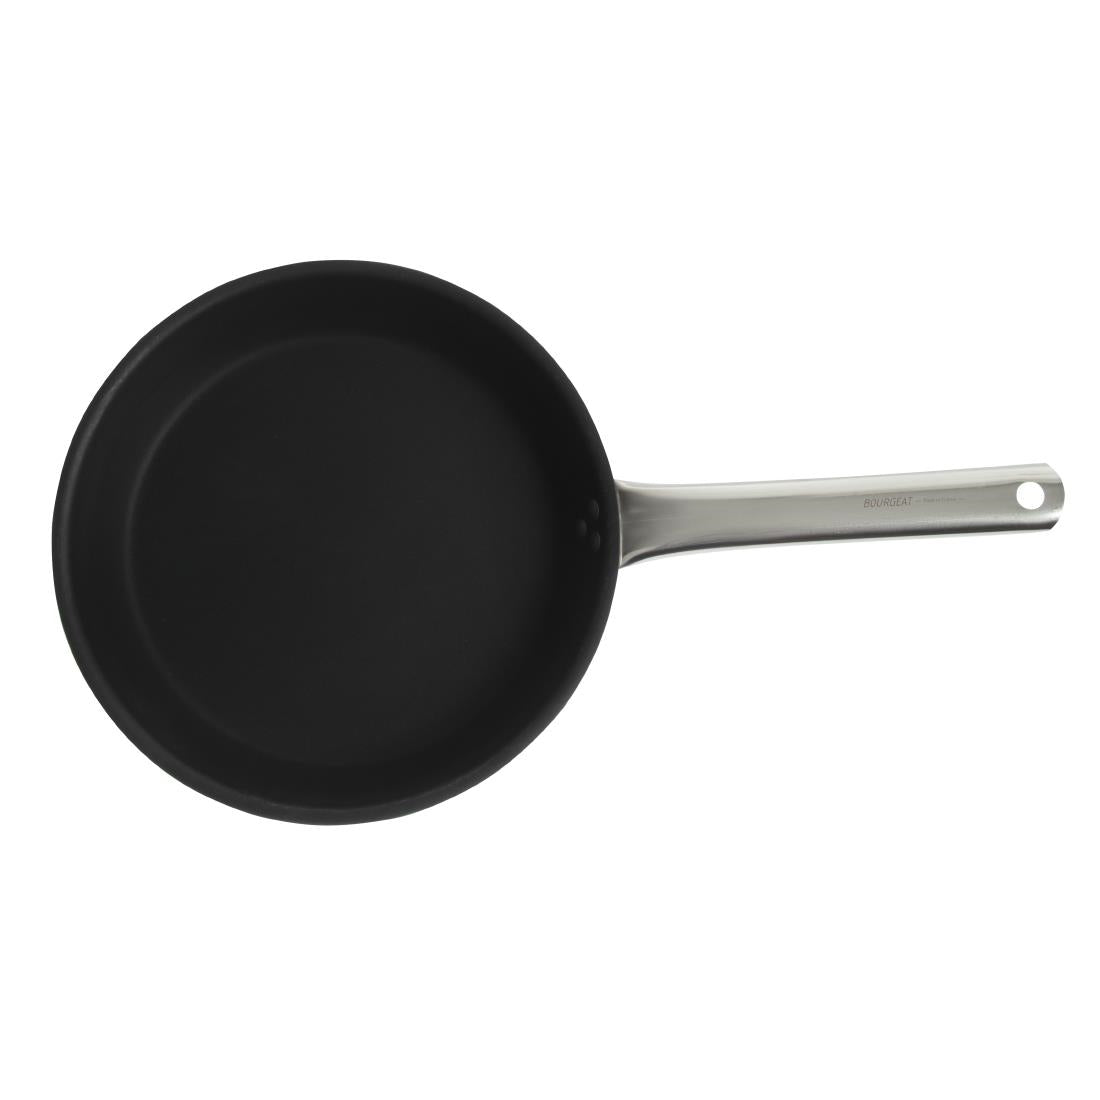 CX540 Matfer Bourgeat Tradition Pro Non-Stick Frying Pan 28cm JD Catering Equipment Solutions Ltd